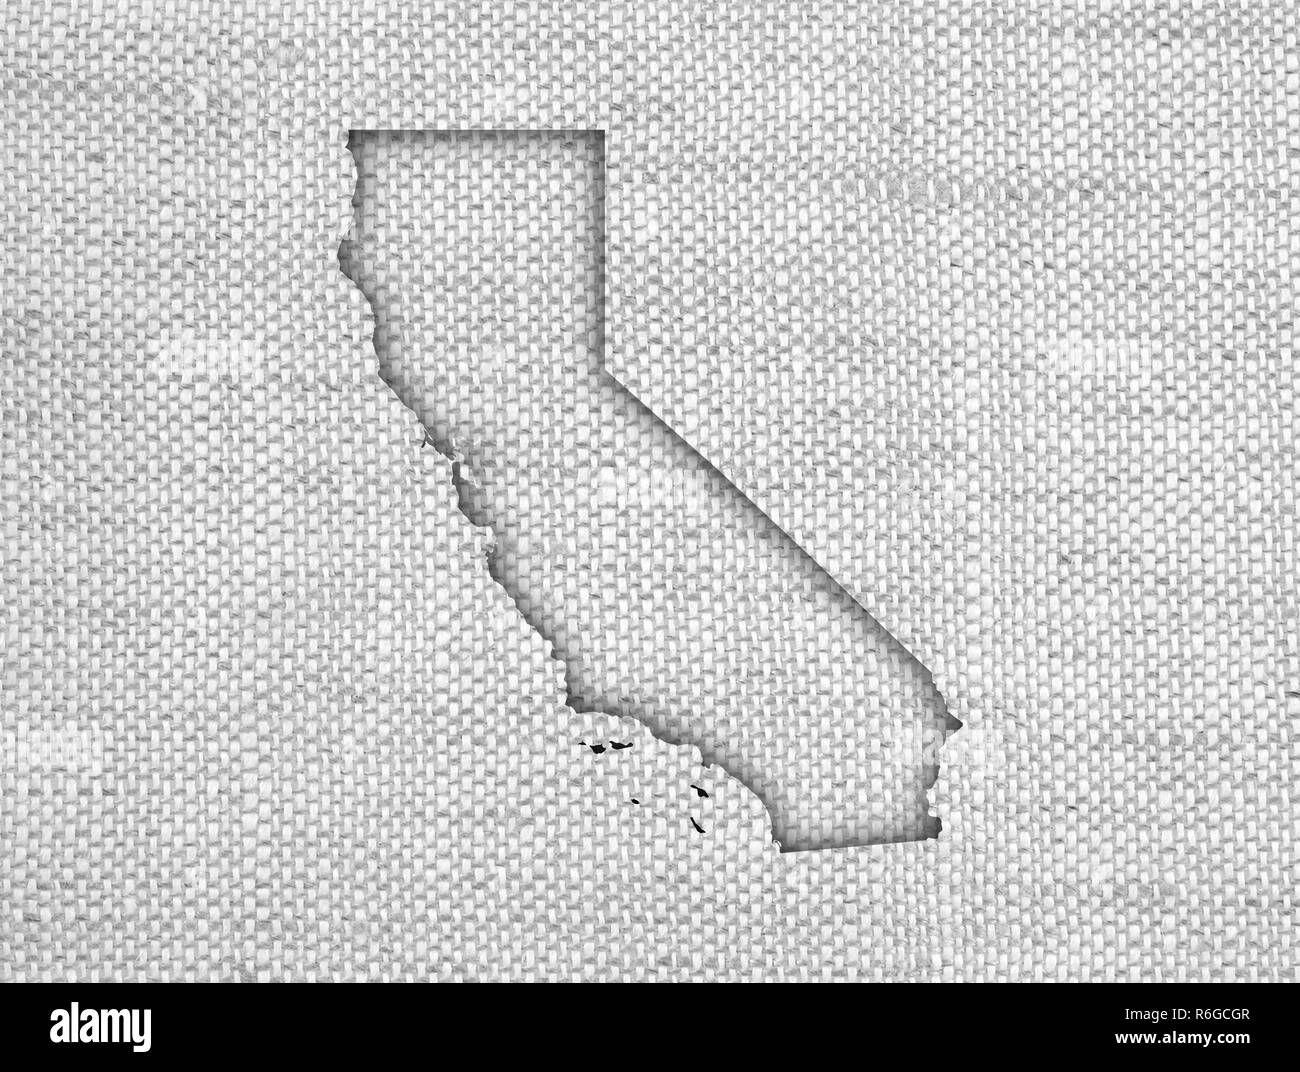 Map of california Black and White Stock Photos & Images - Alamy